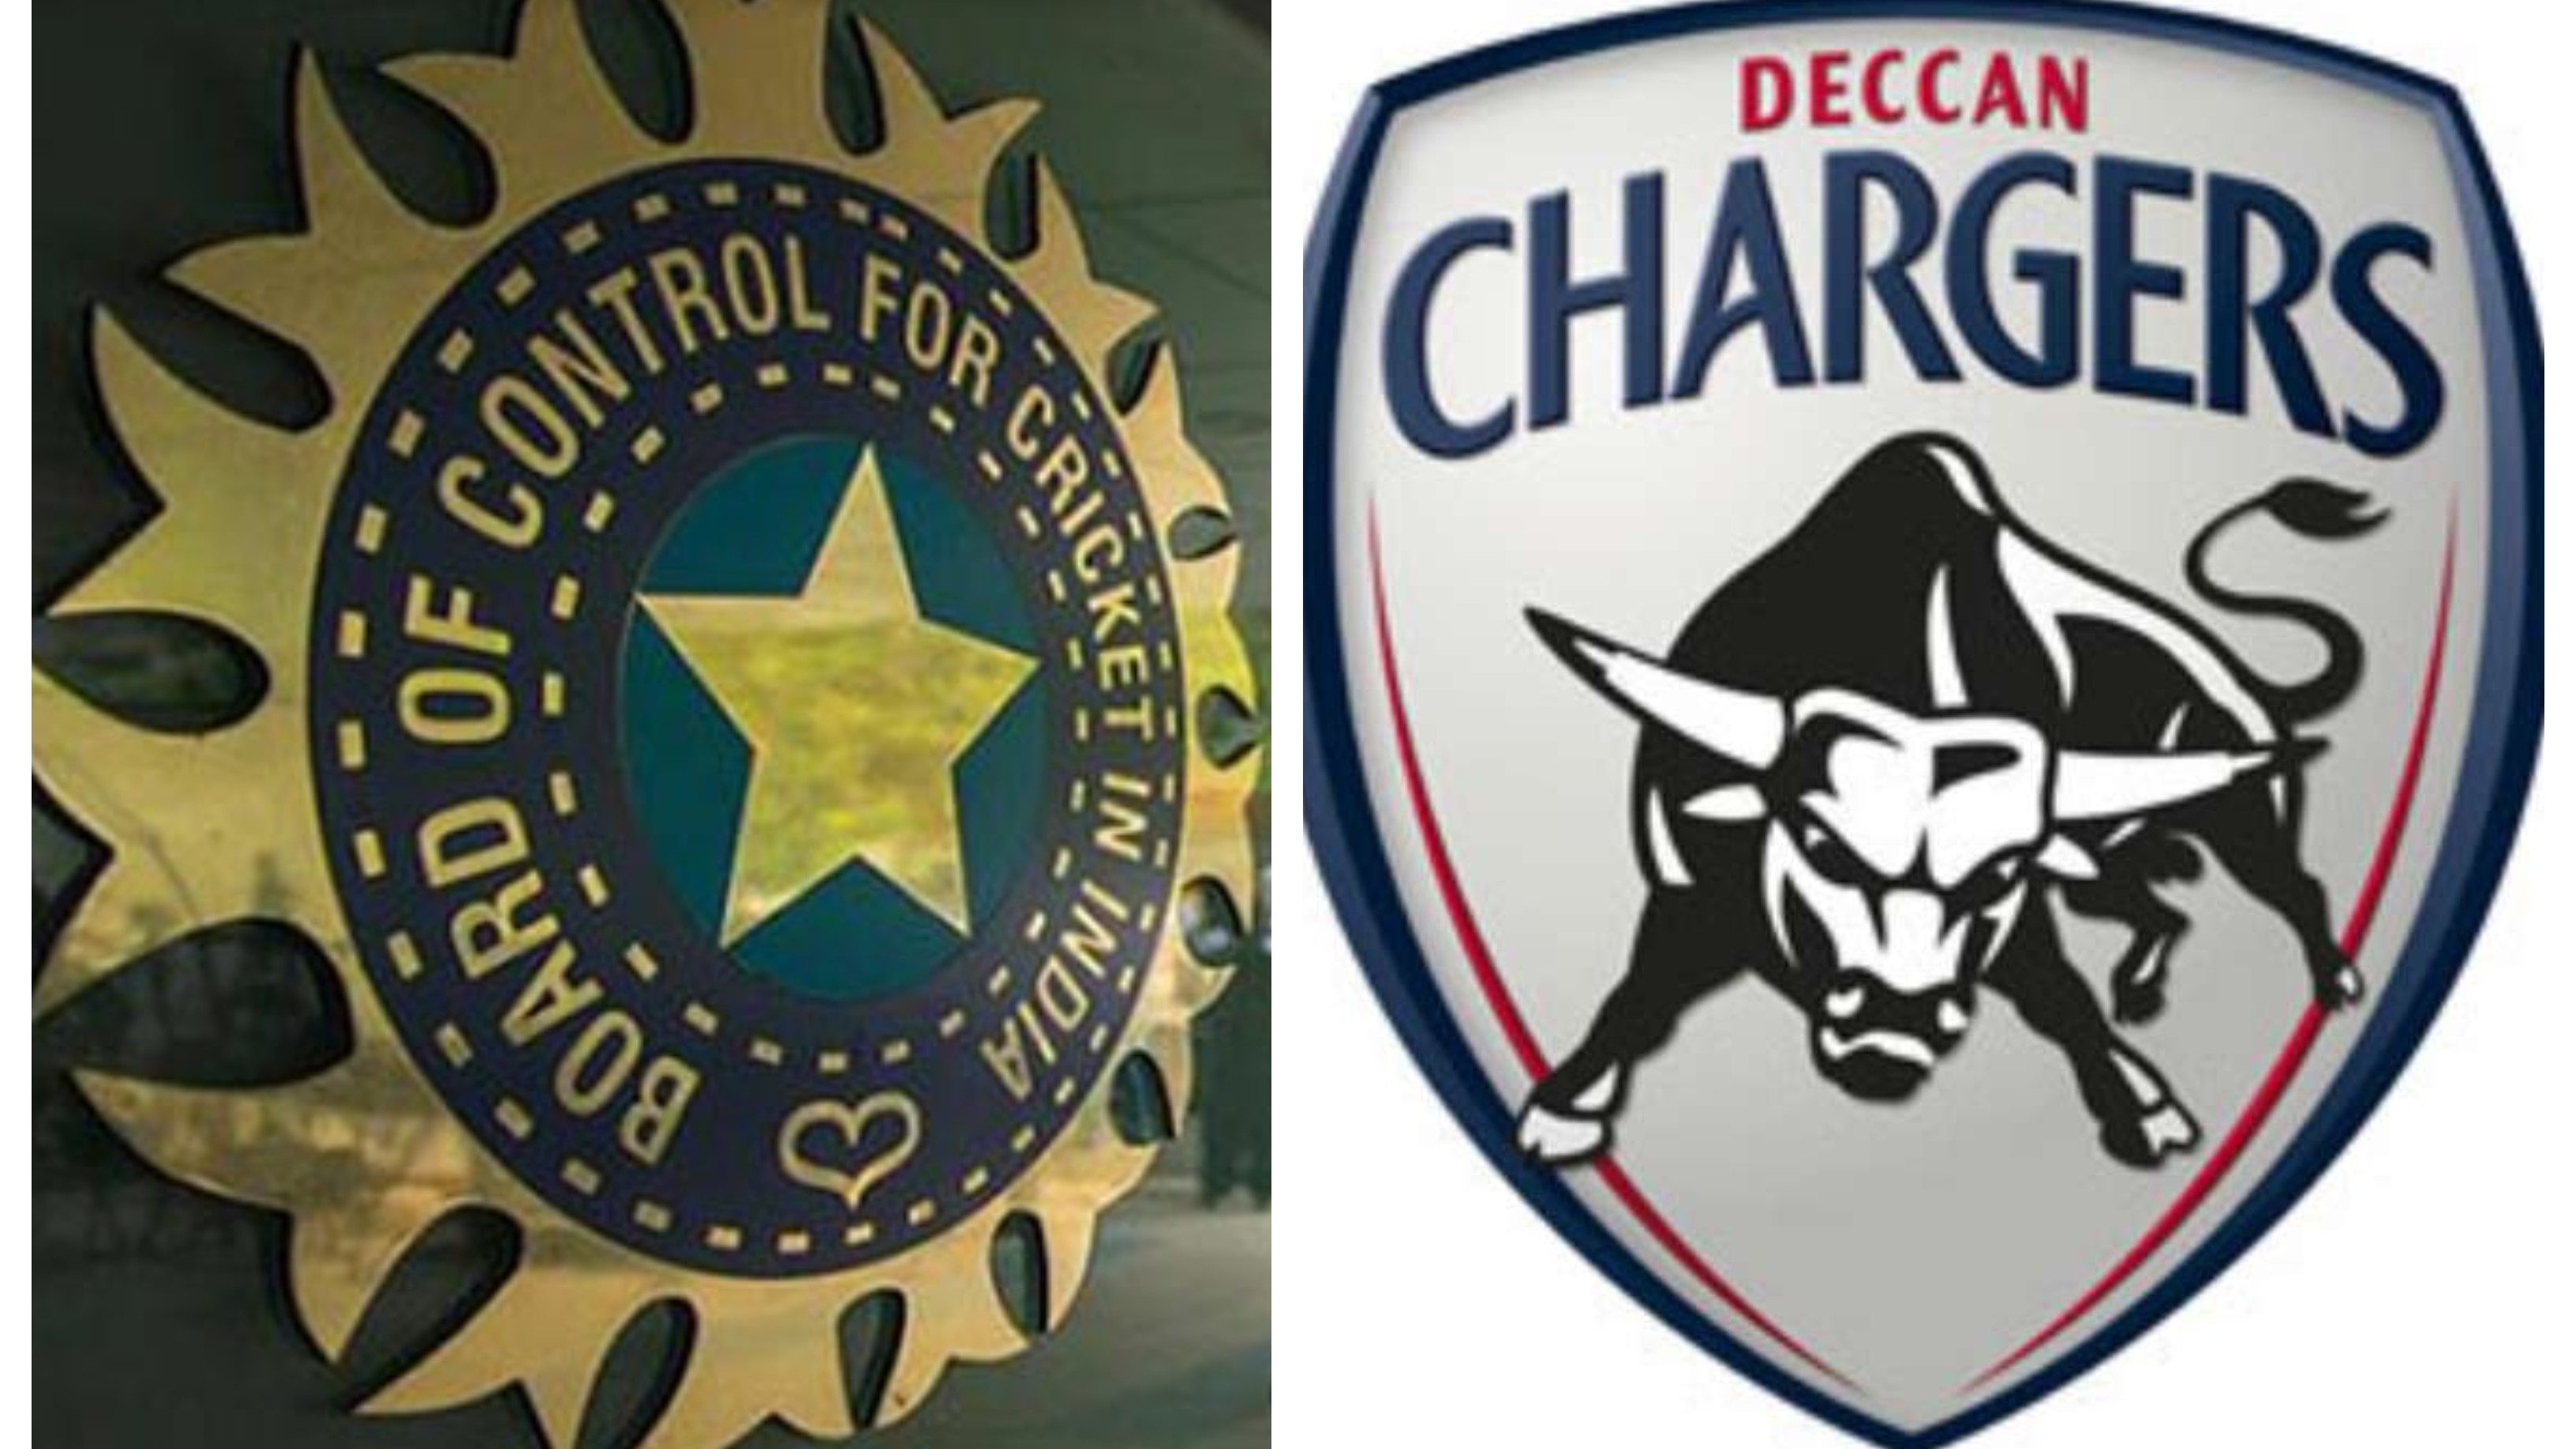 Arbitrator orders BCCI to pay Rs 4,800 crore to Deccan Chargers for ‘wrongfully terminating’ the IPL franchise